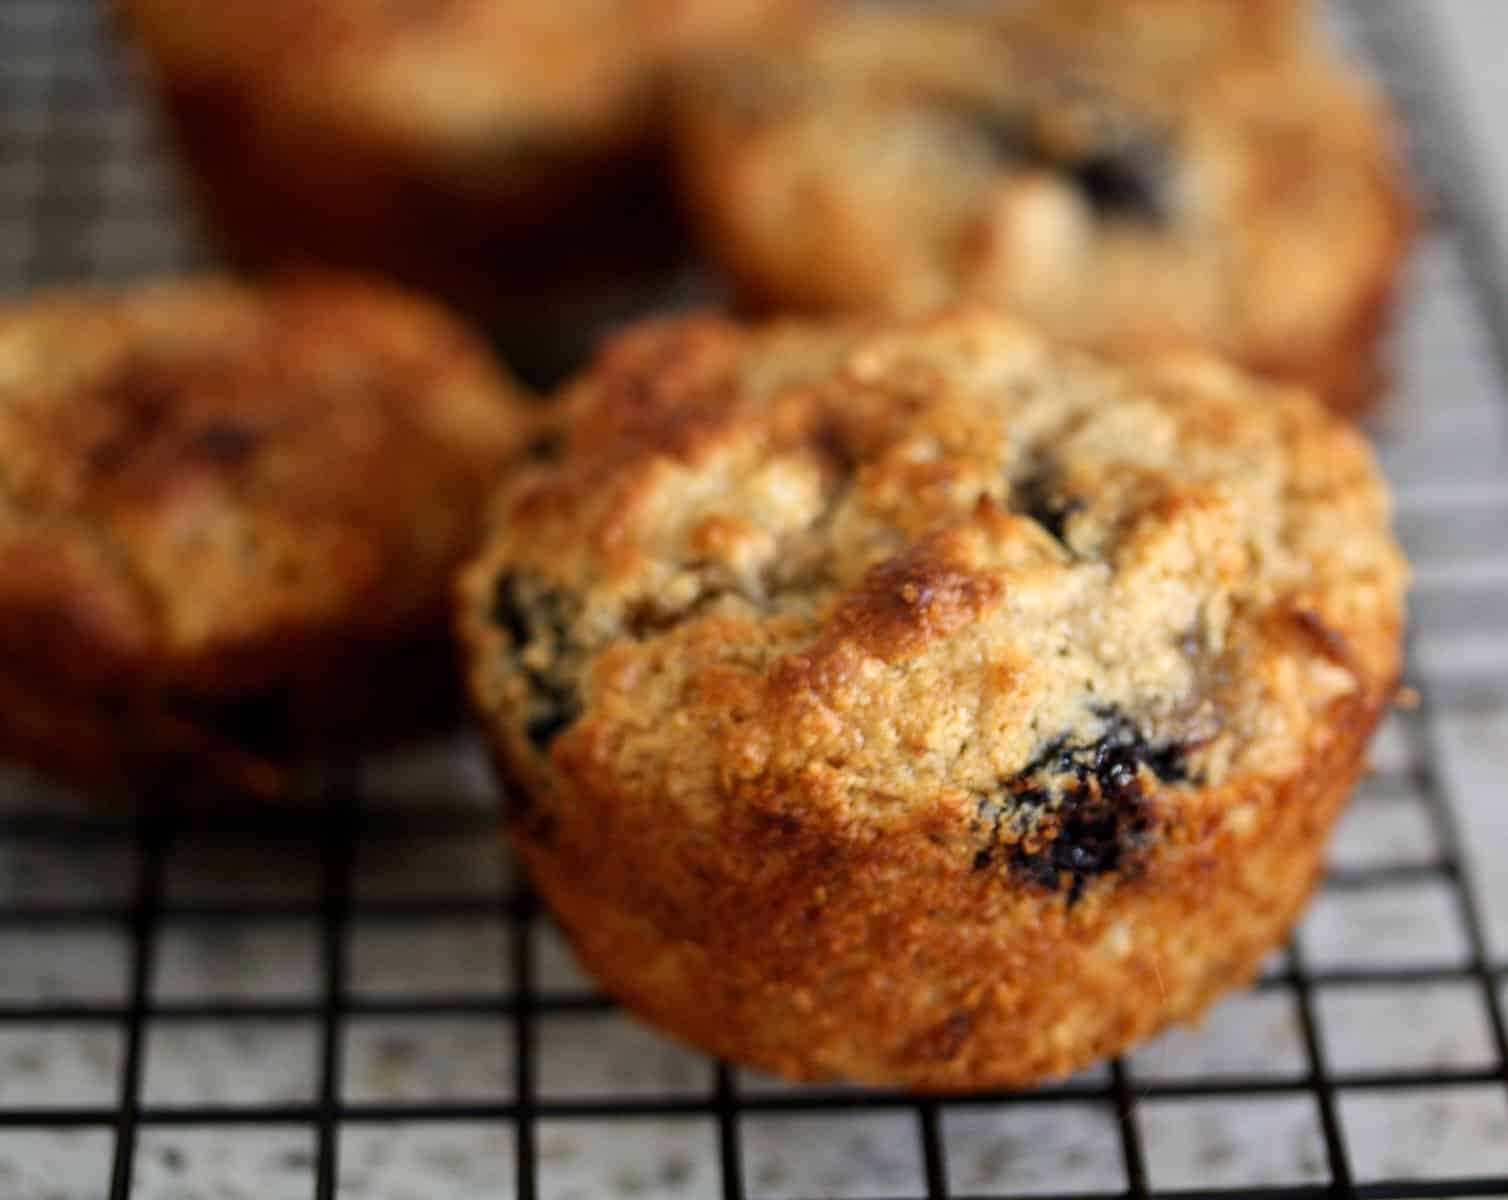 A close up of a leftover oatmeal muffins with blueberries on a wire rack.